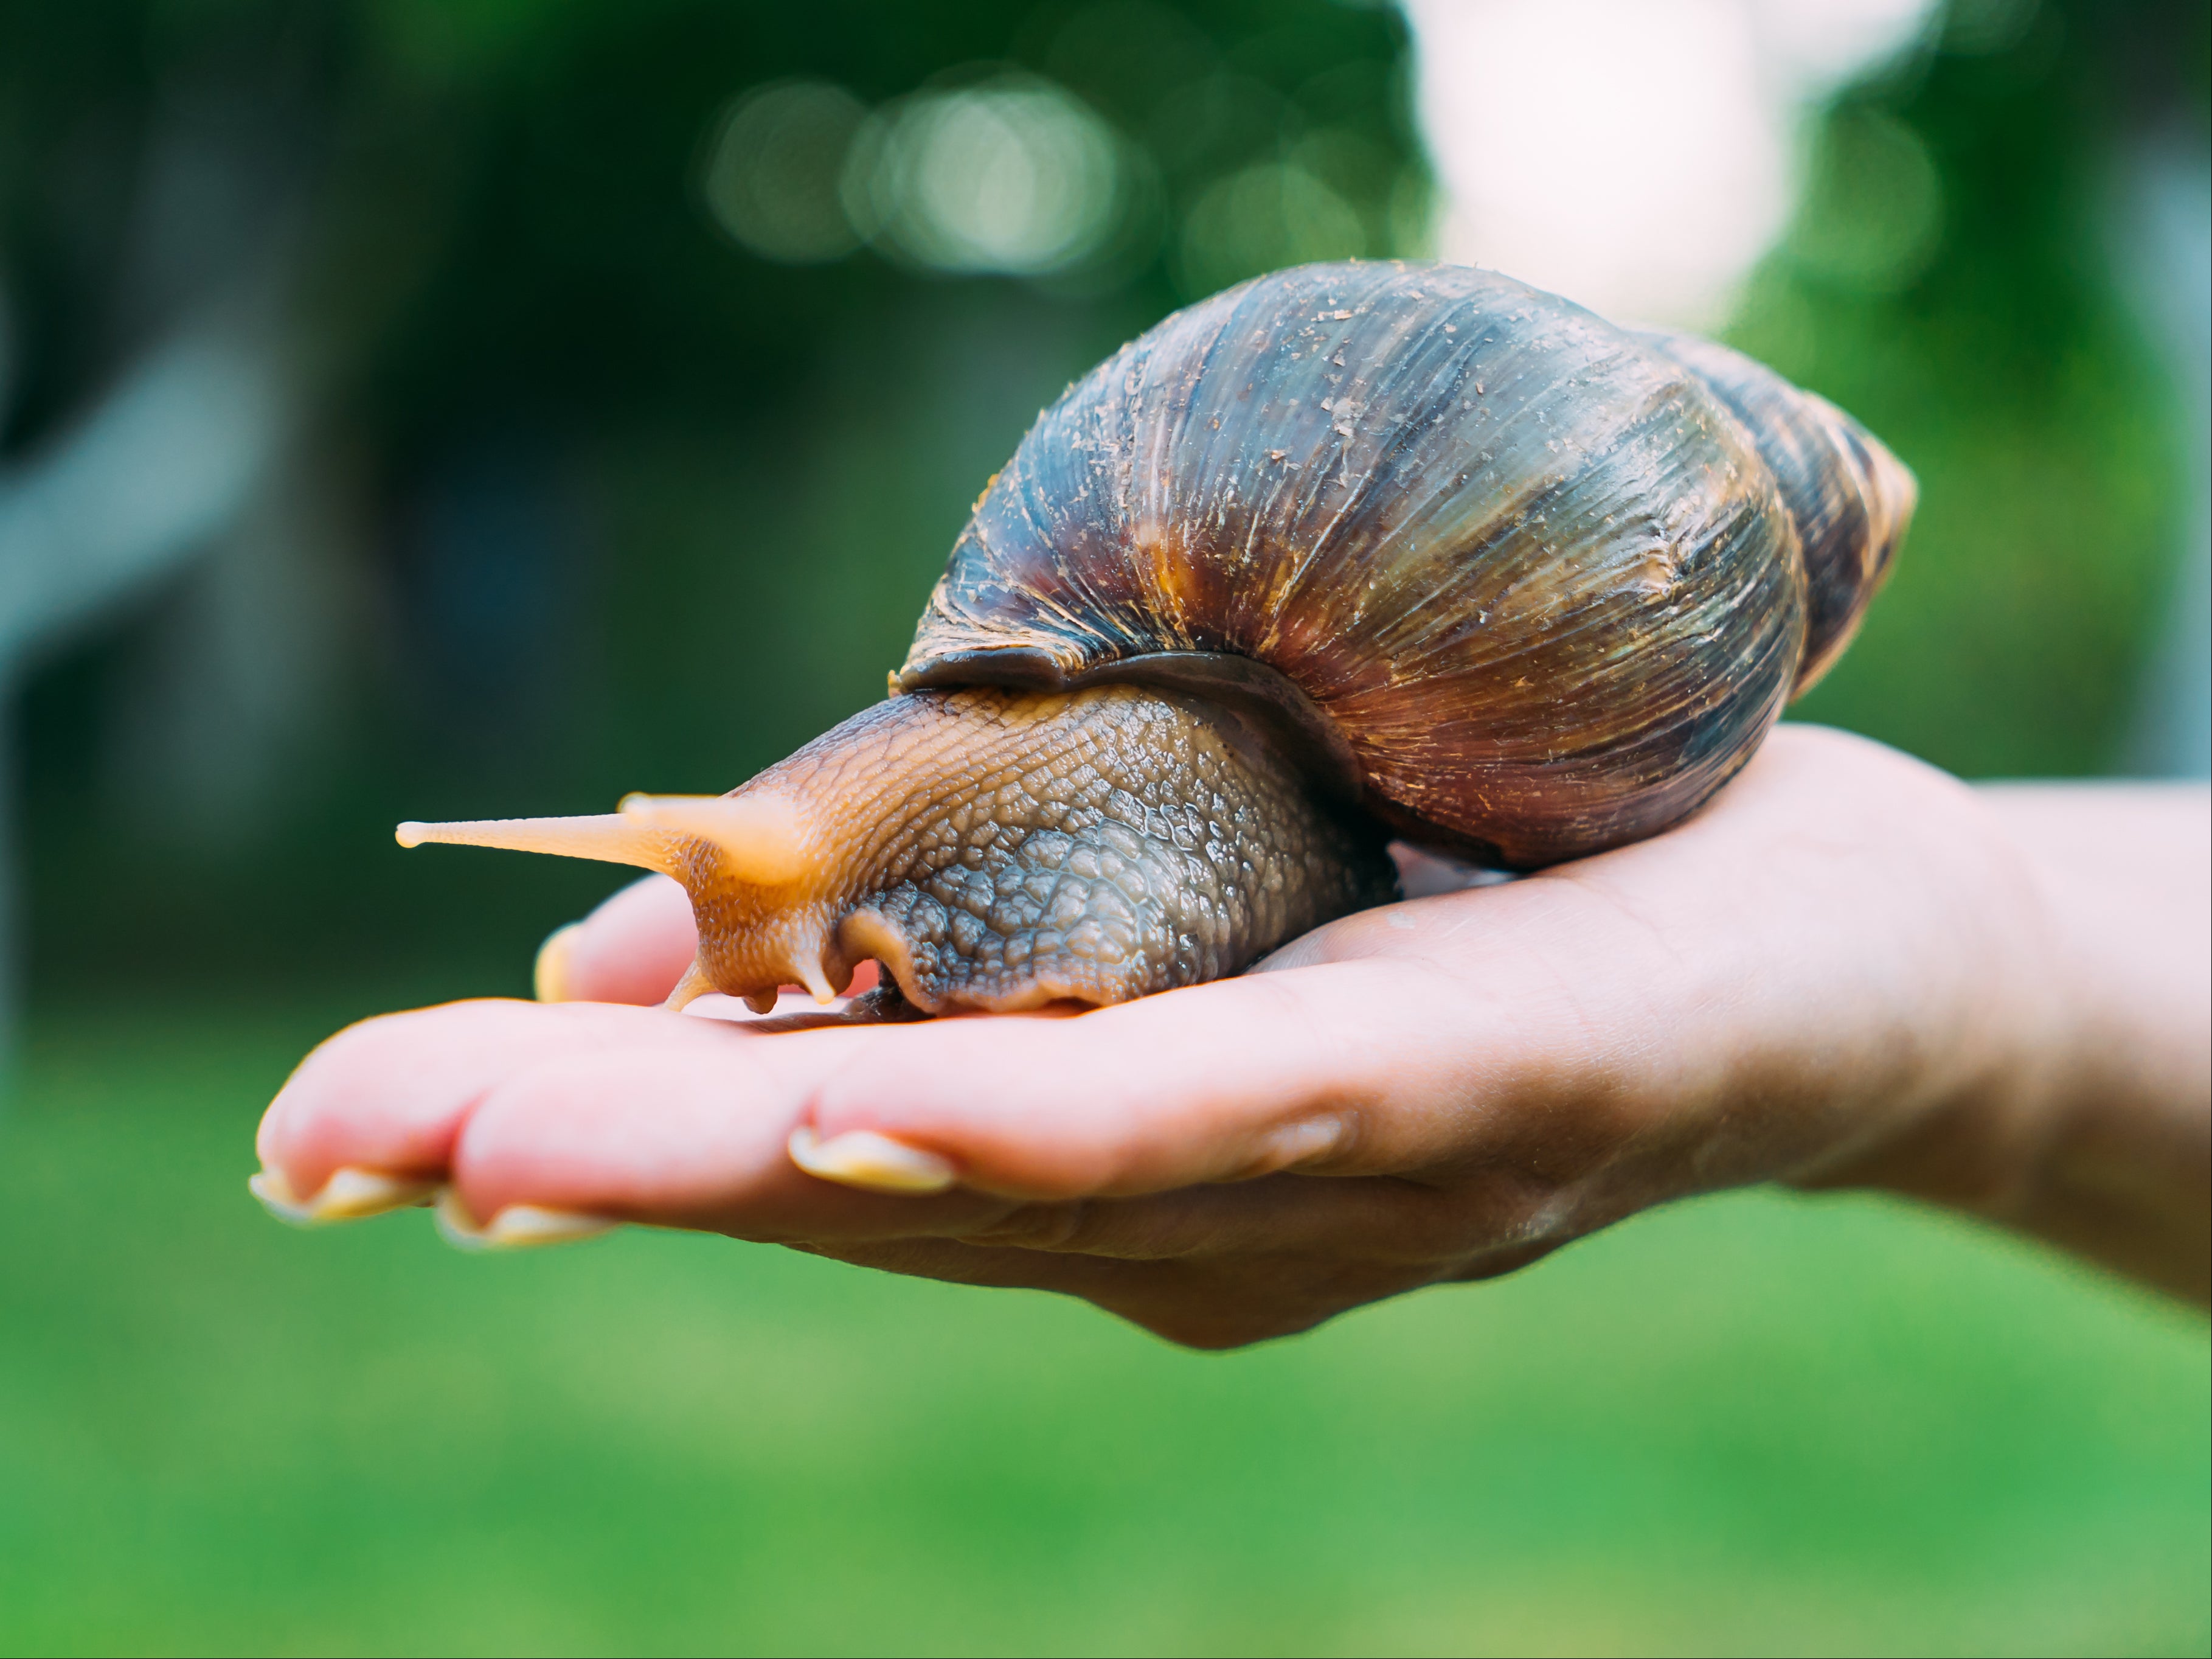 The giant African land snail can grow up to eight inches long